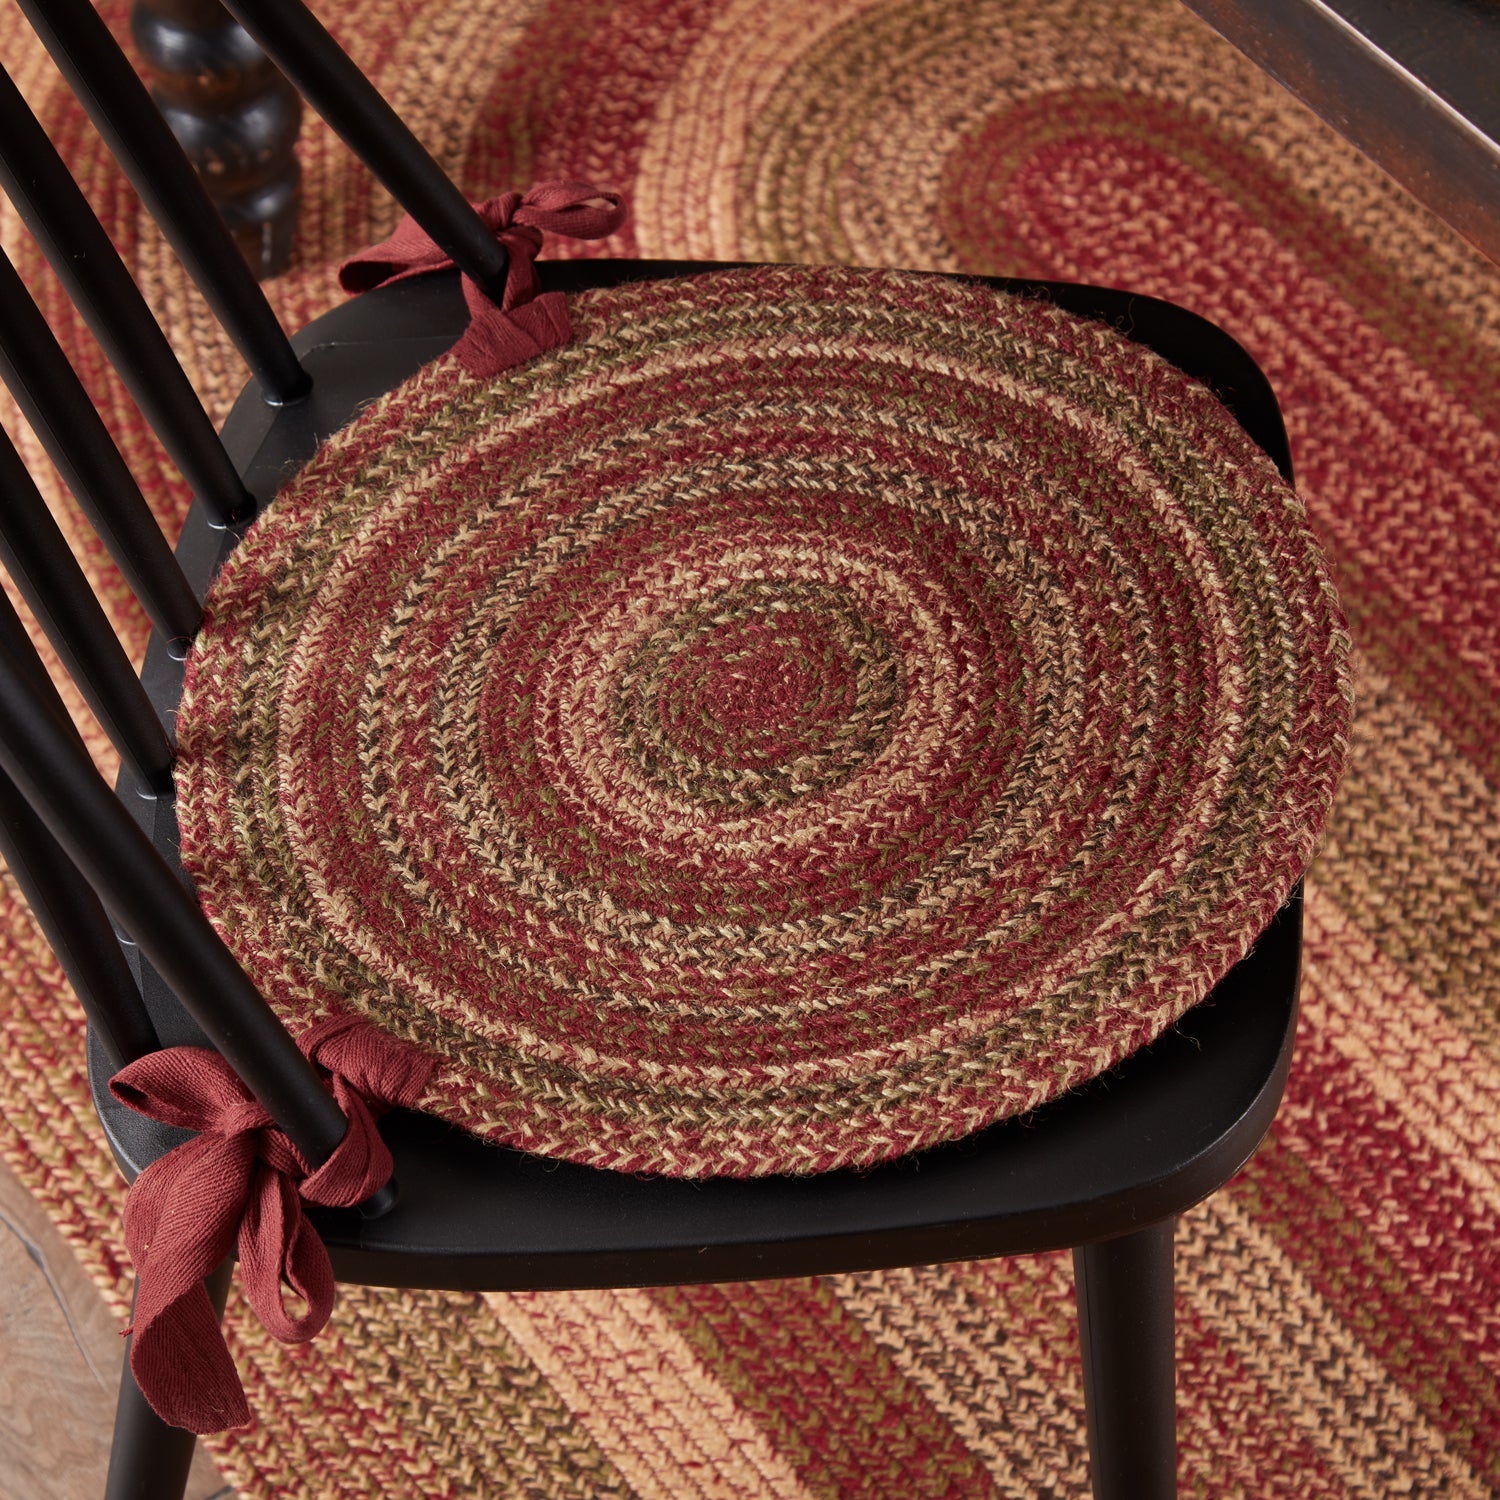 Cider Mill Jute Braided Chair Pad Set of 6 Burgundy, Natural, Green